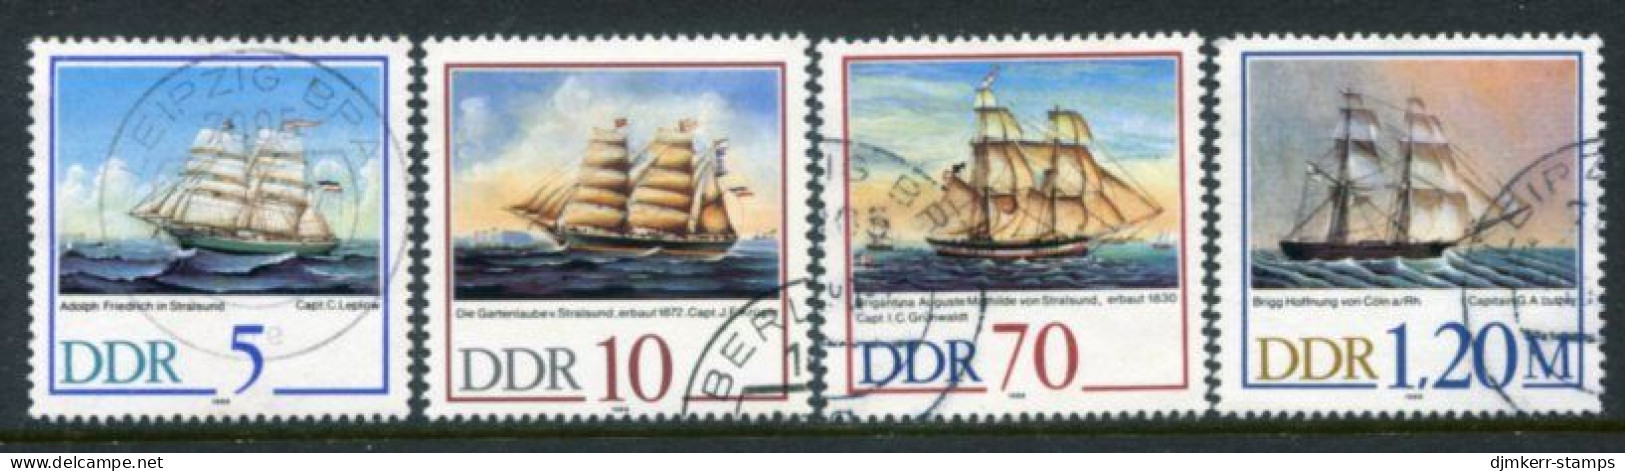 EAST GERMANY / DDR 1988 Sailing Ships Used .  Michel 3198-201 - Usados